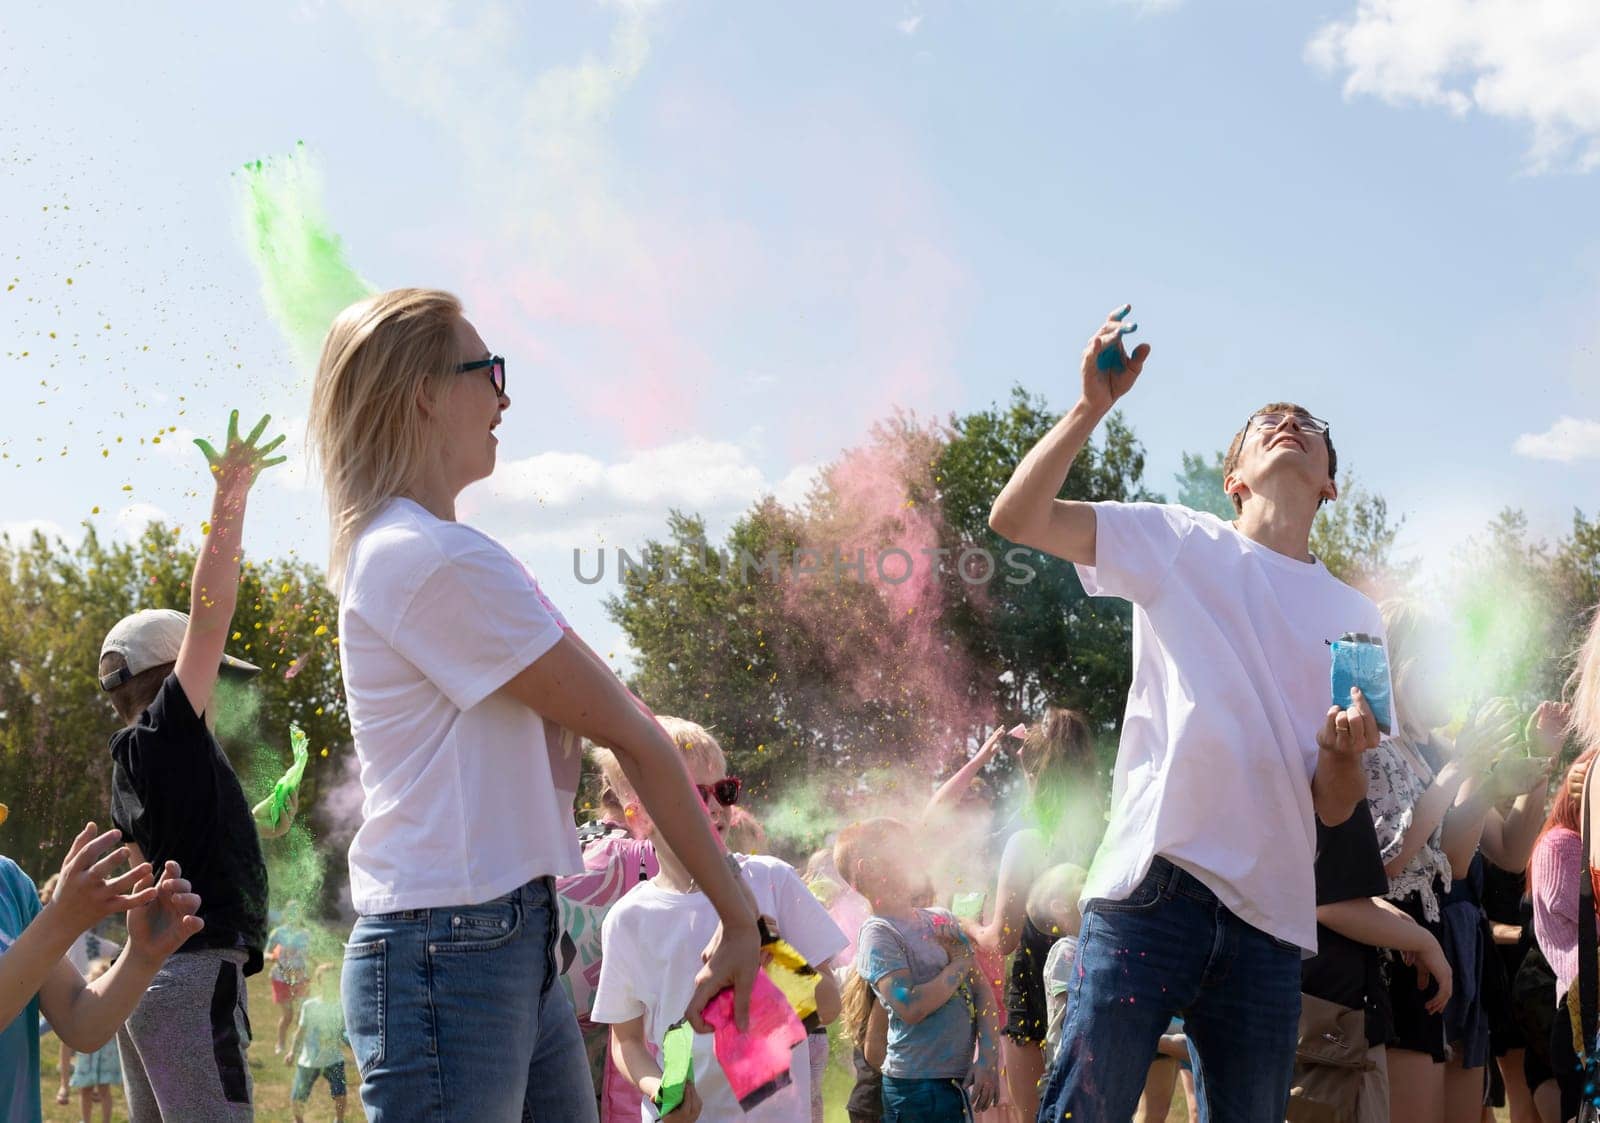 Caucasian Adults And Children Celebrate Holi Color Festival, Throwing Colored Dye In Air. Group Of Kids, Parents Playing With Paint Outdoor In Park. Birthday, Cheerful Family Activity.Horizontal Plane by netatsi